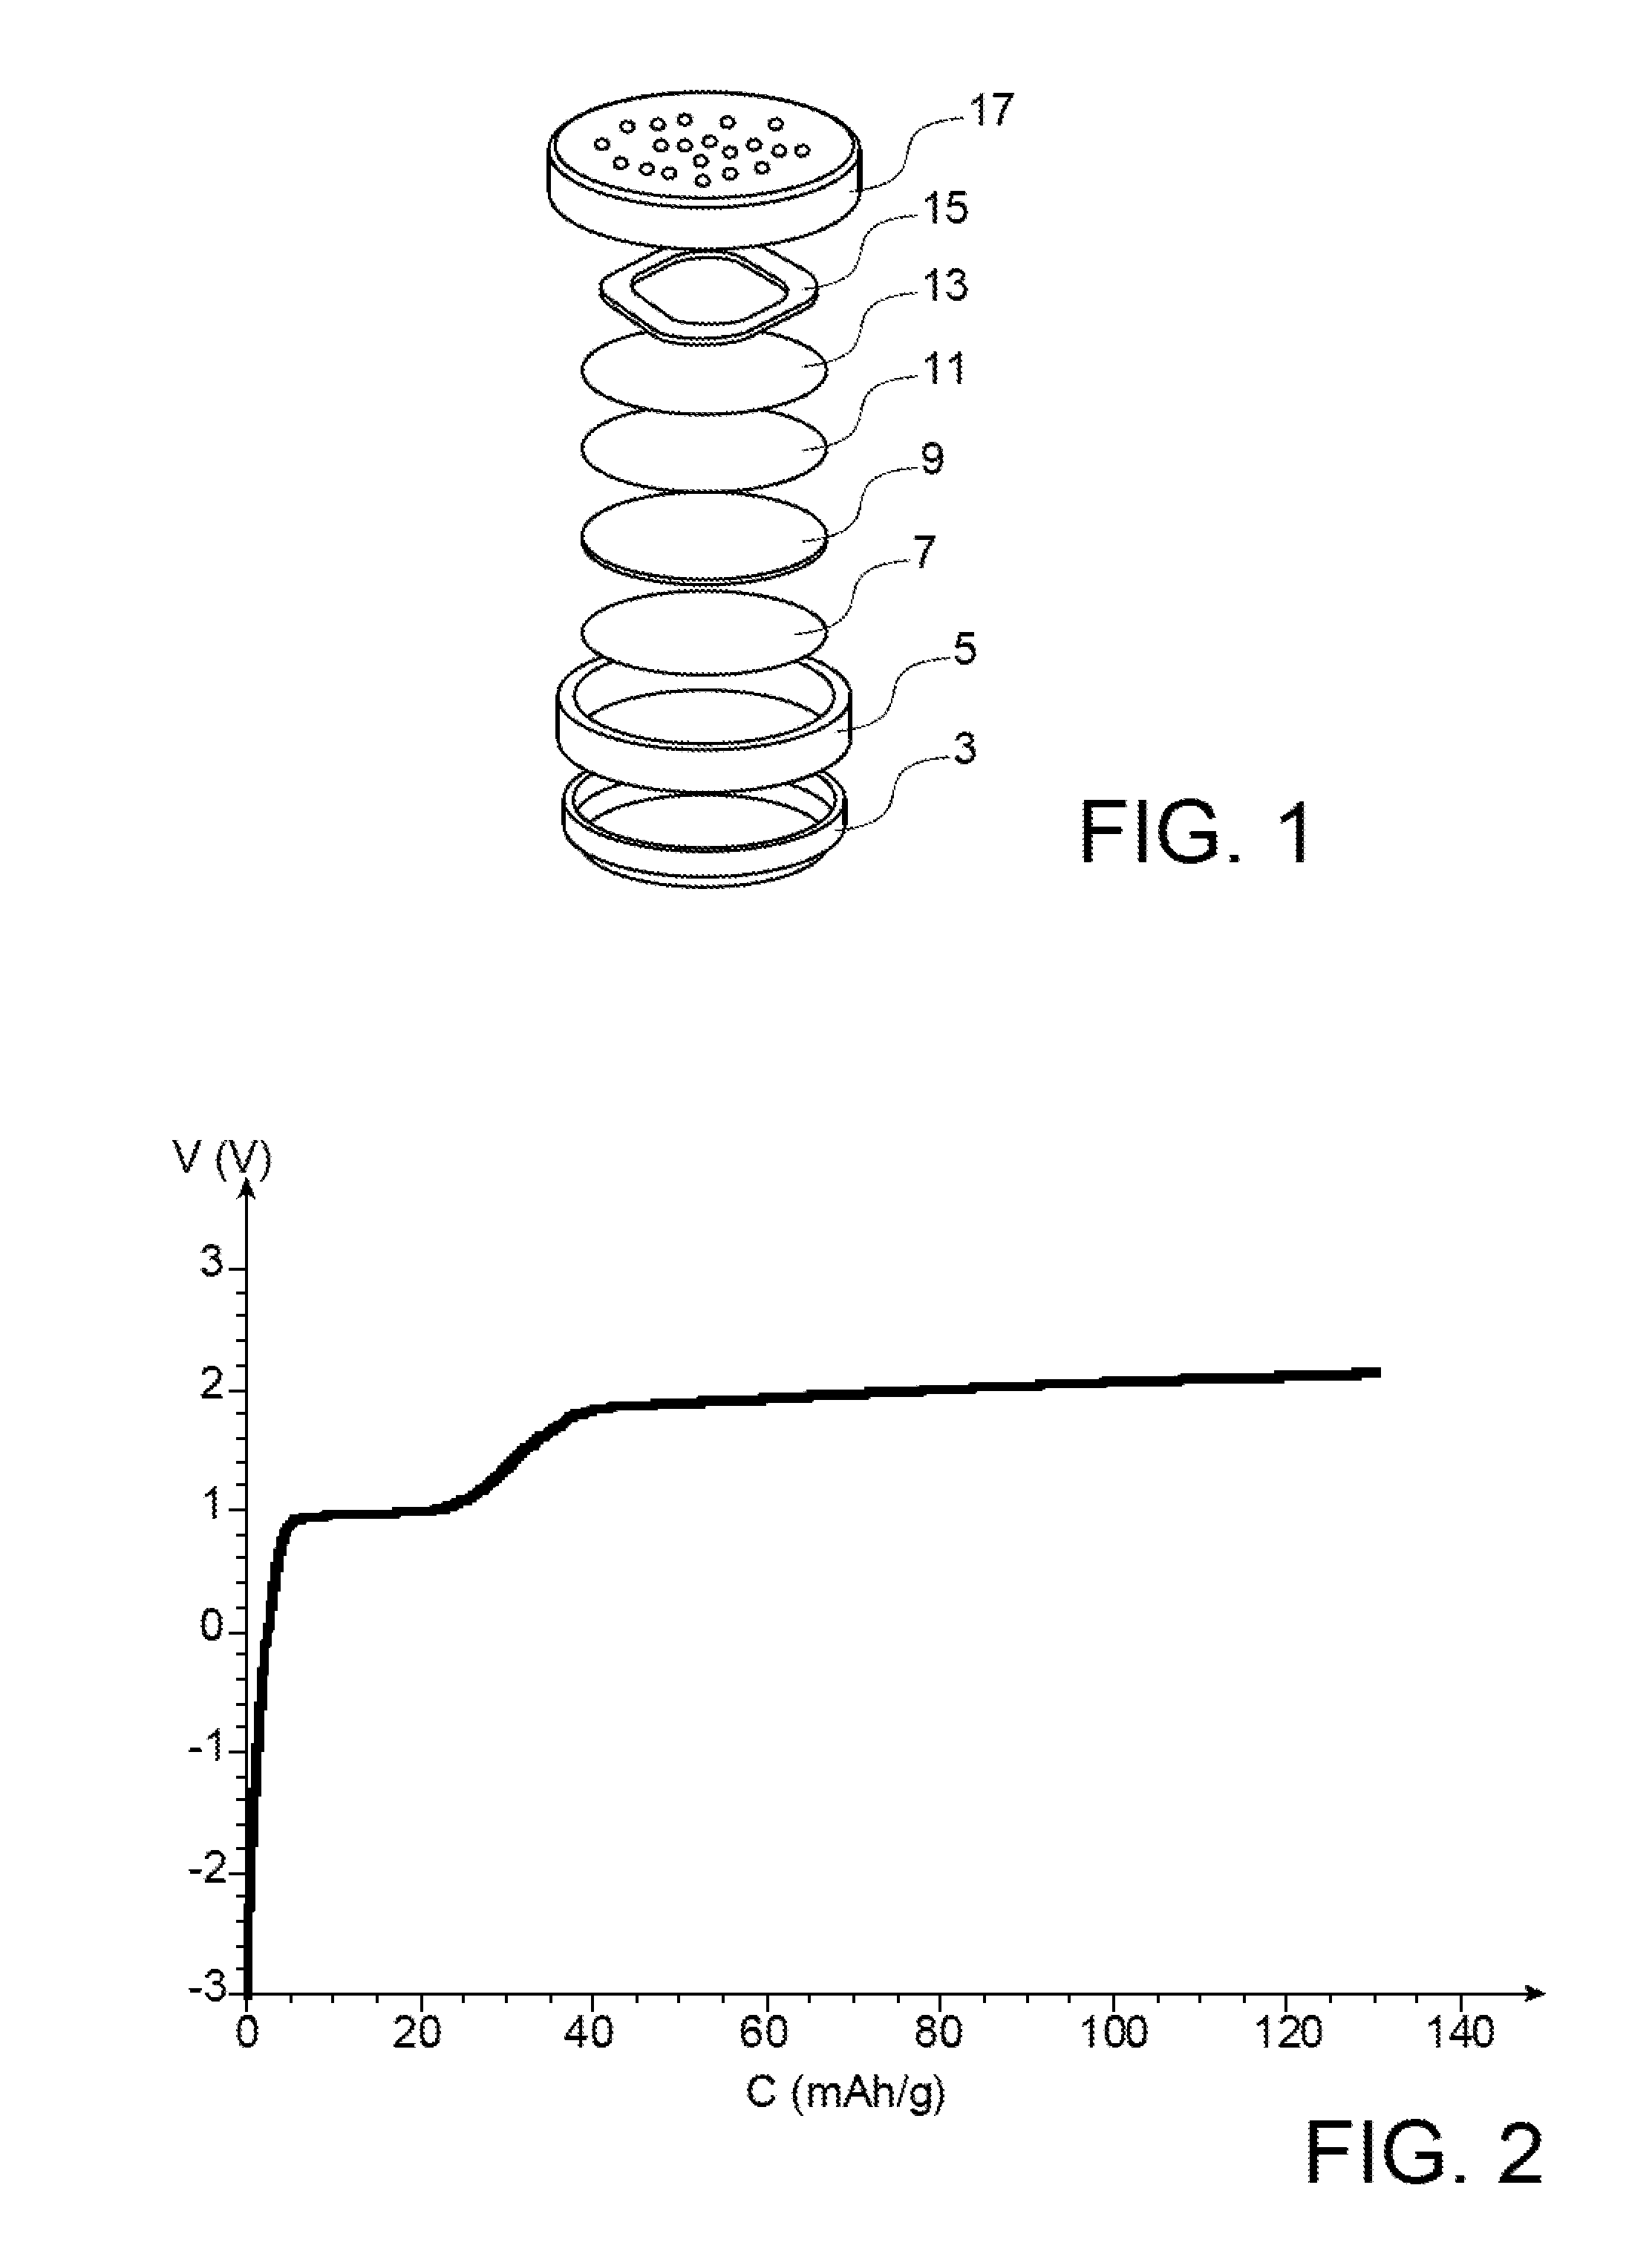 Lithium electrochemical storage battery of the lithium/air type